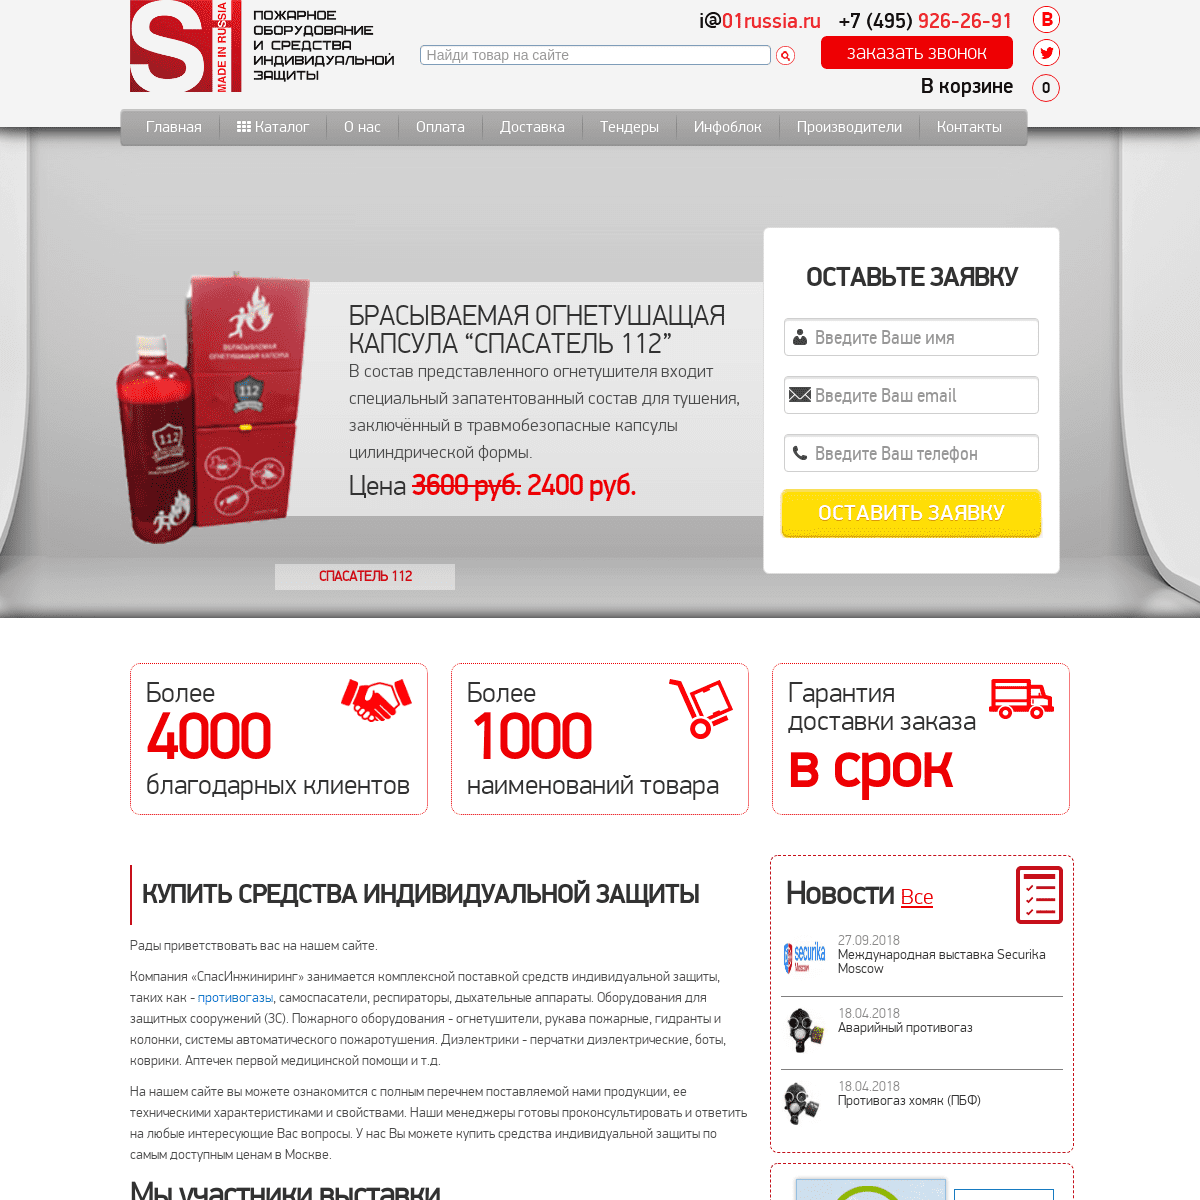 A complete backup of https://5050562.ru